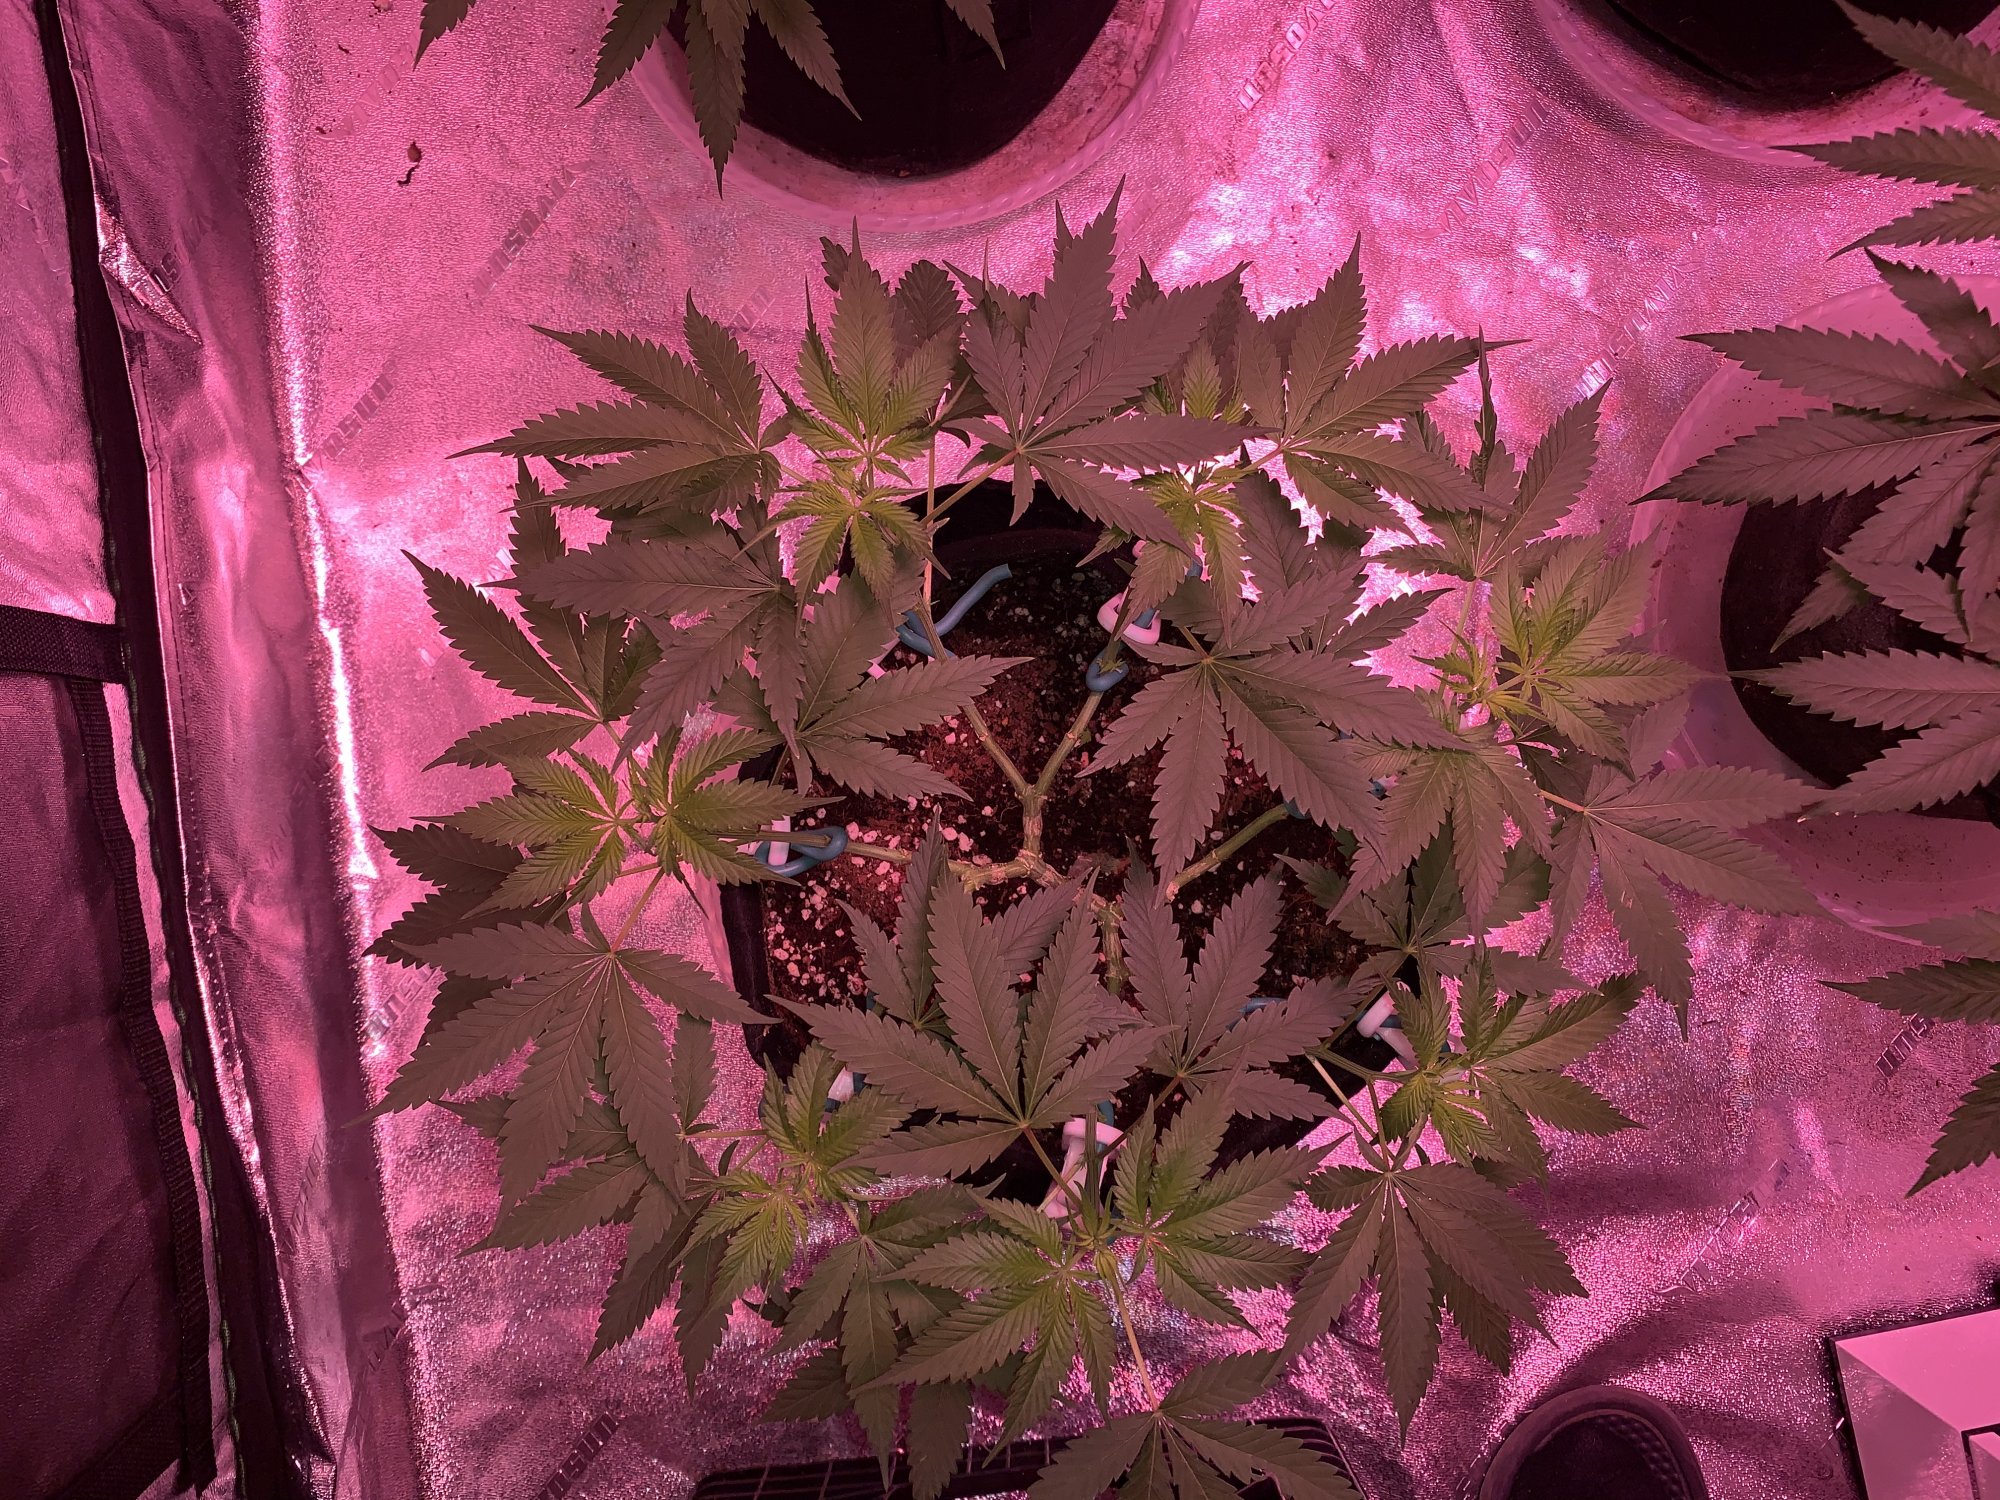 First time grower finally flipping my plants into flower and starting the 1212 cycle 7